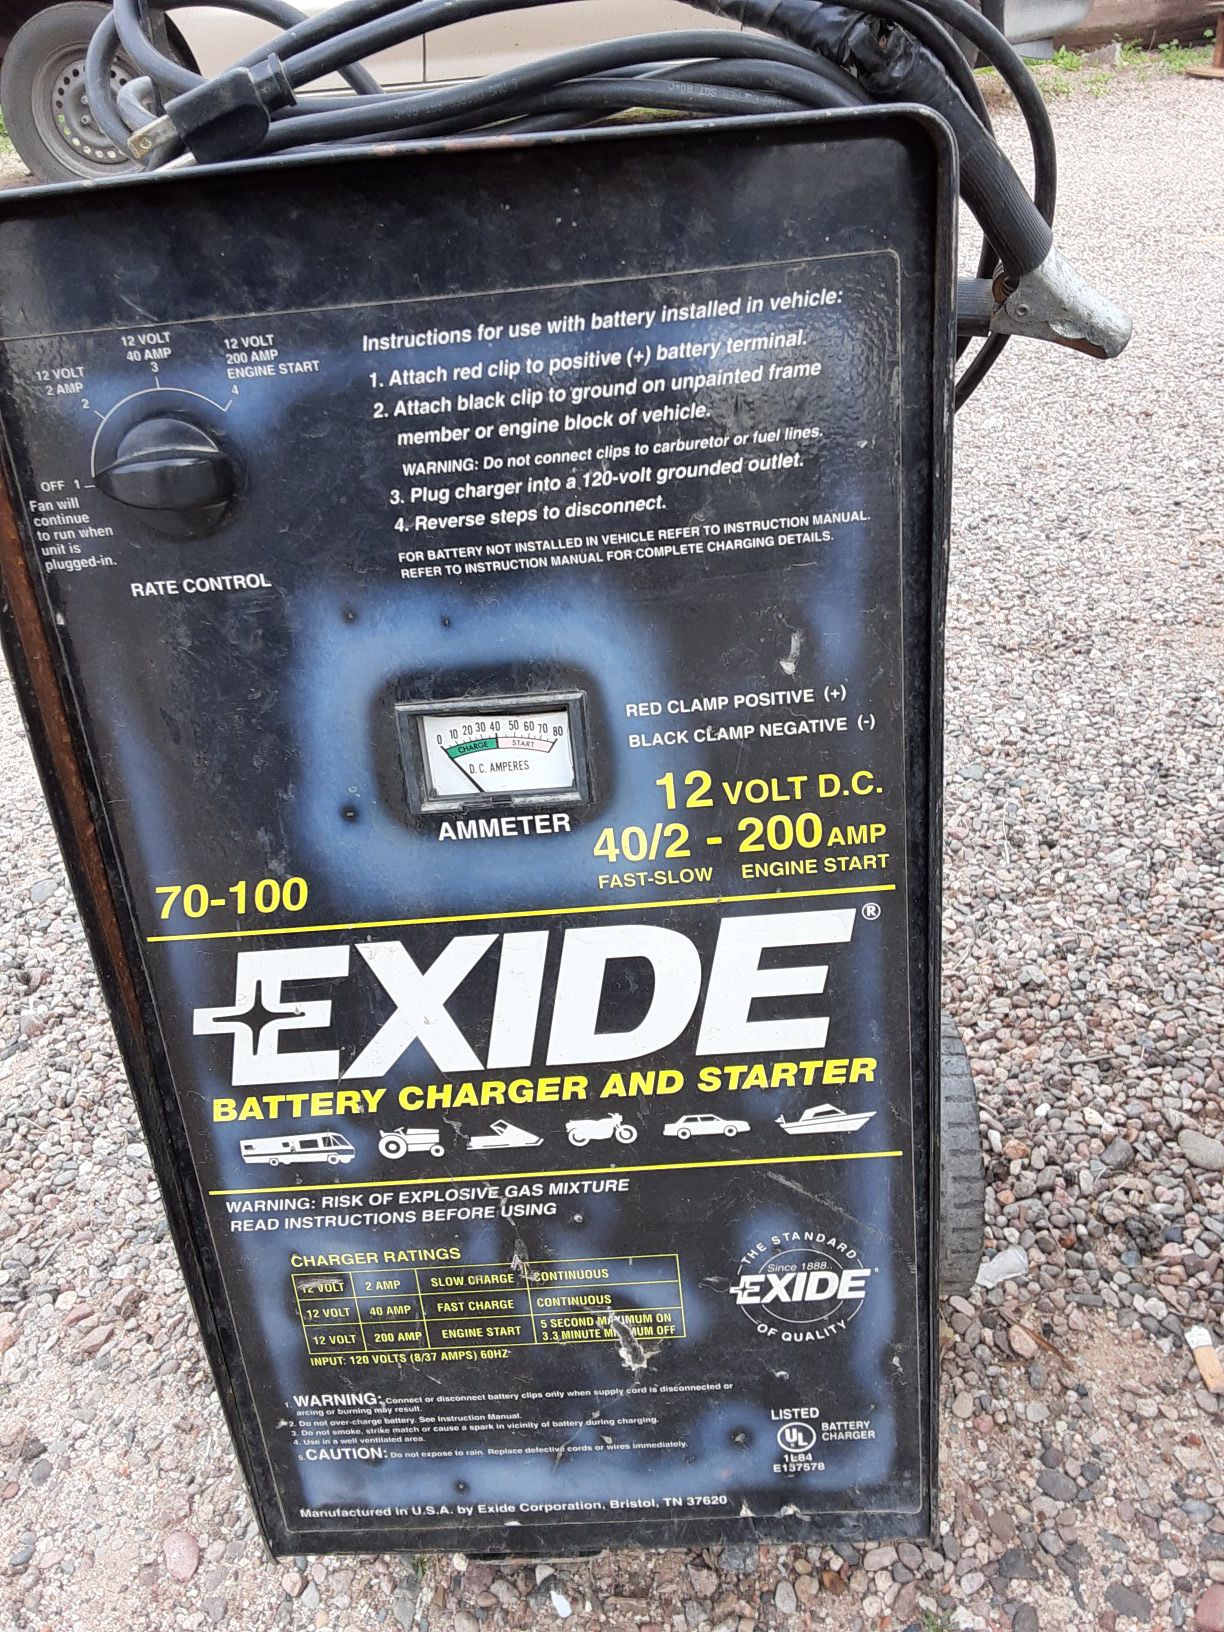 Exide battery charger and starter